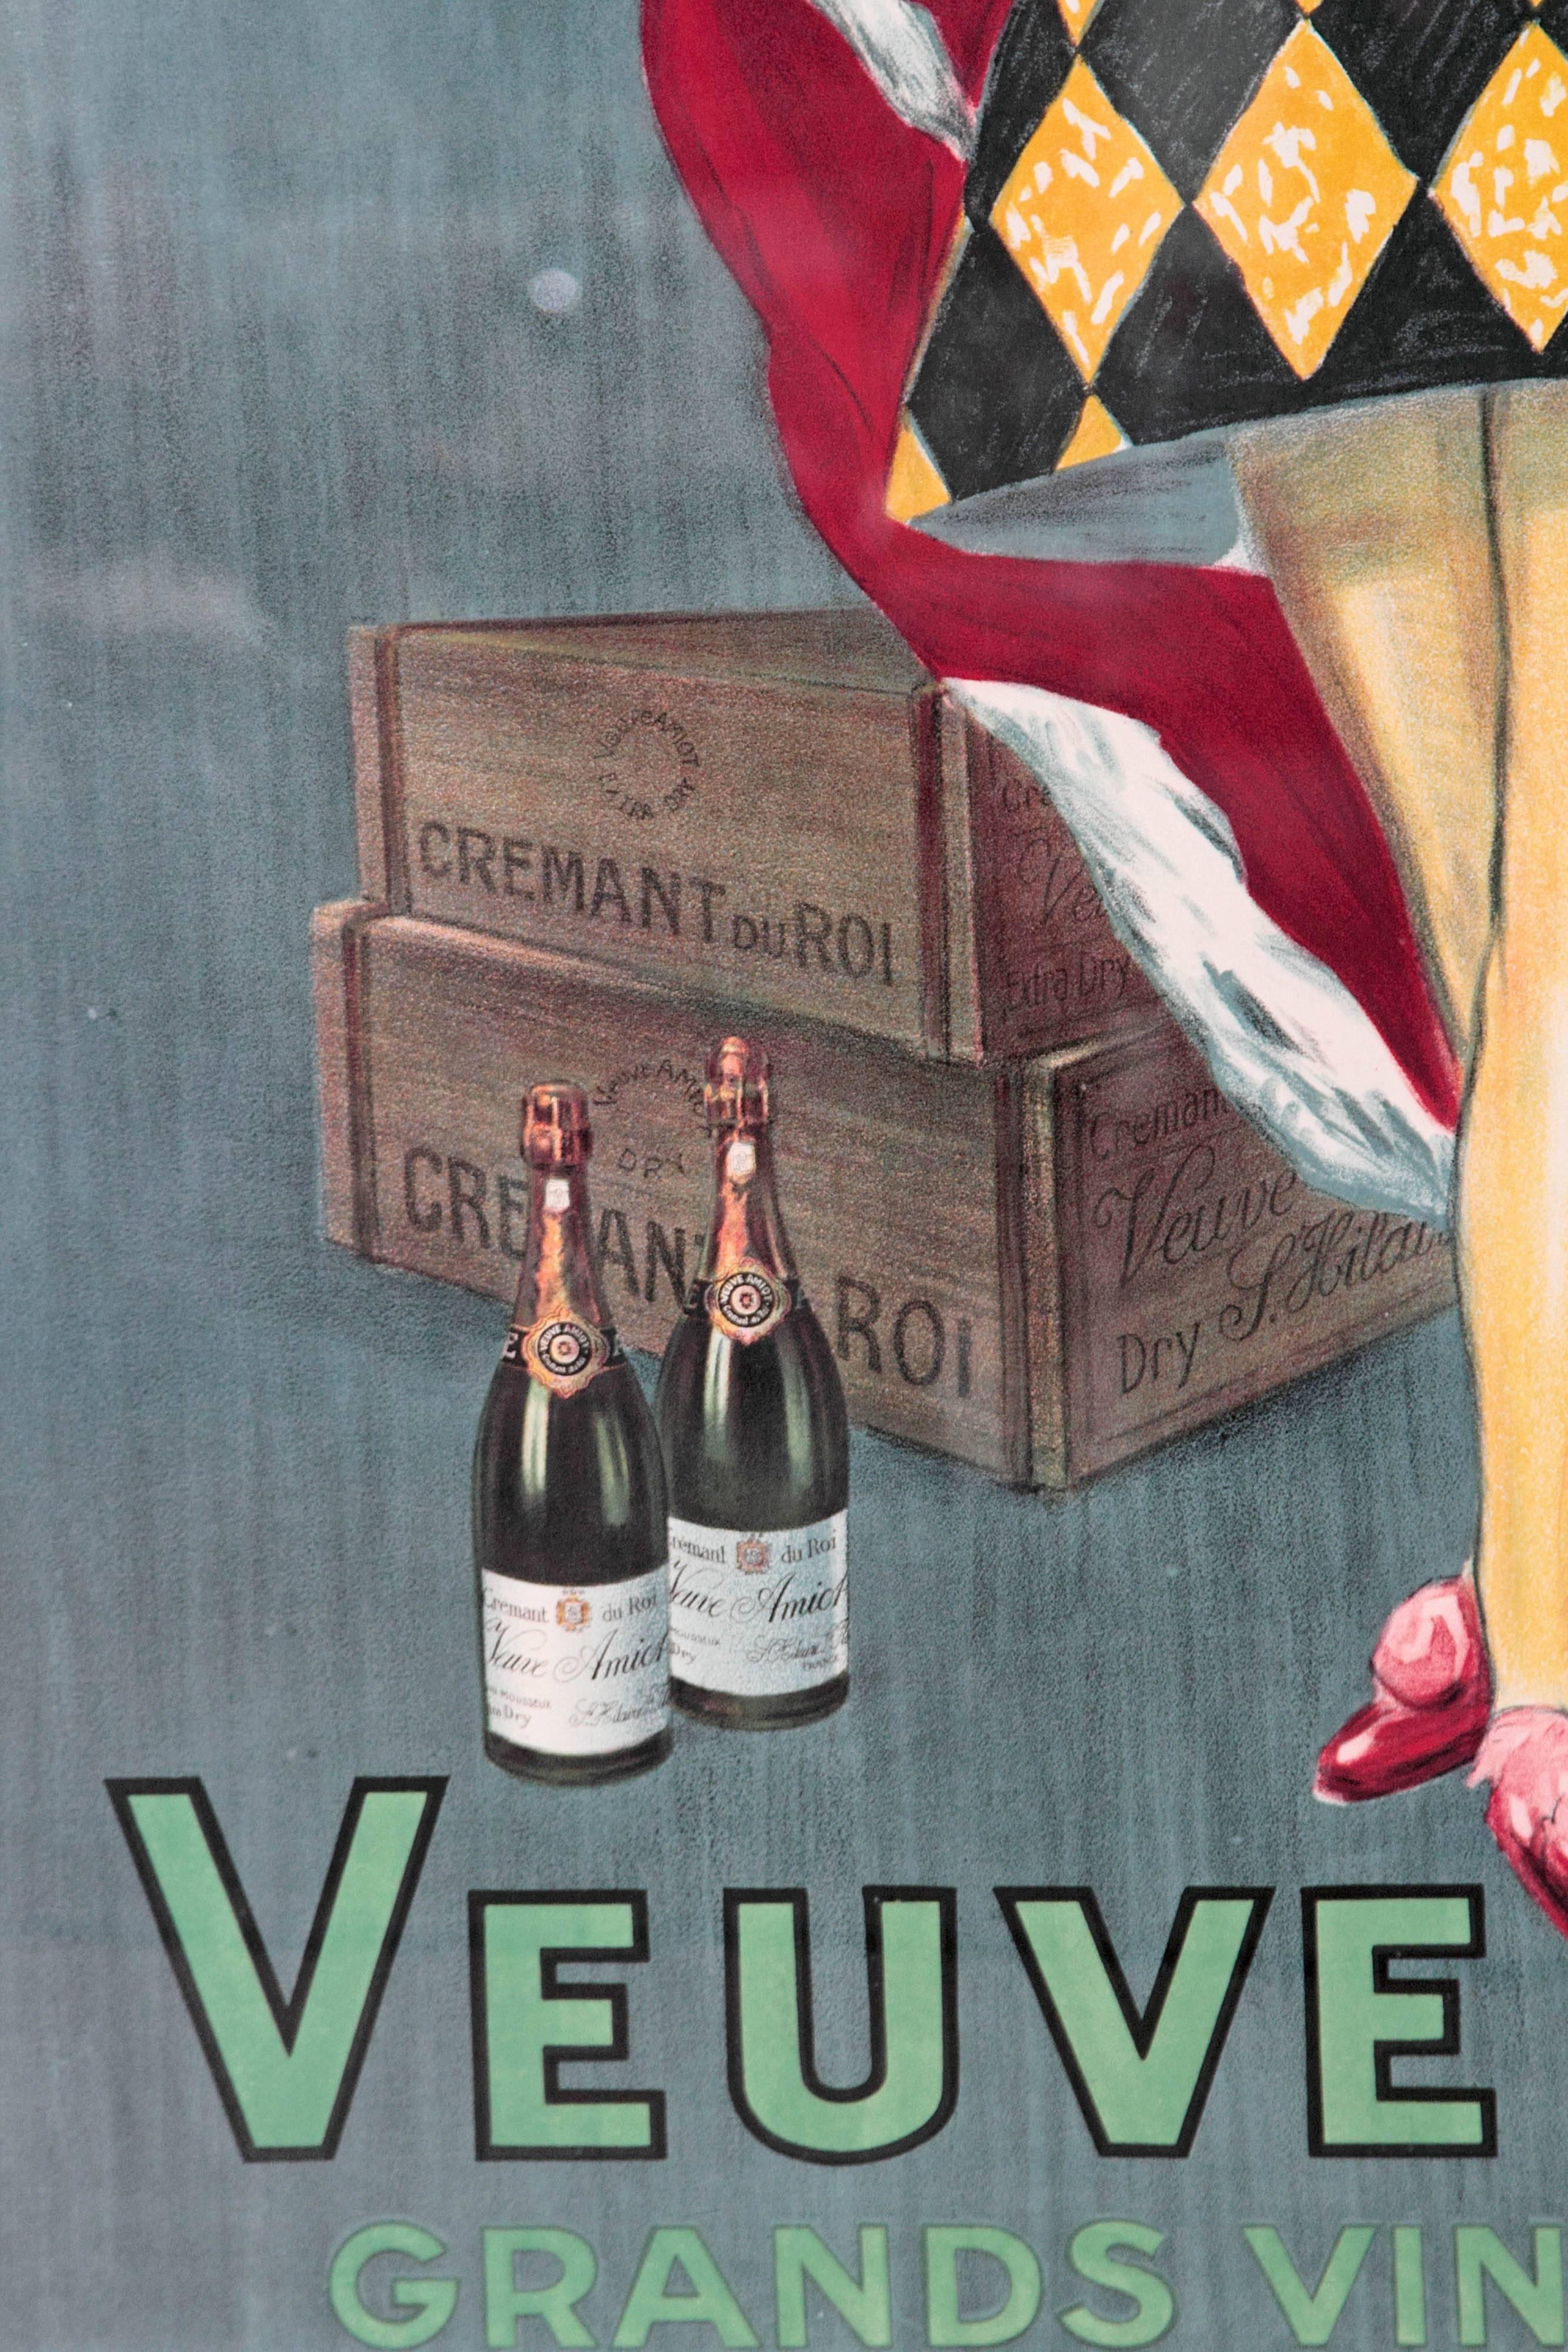 Large-scale advertising color lithographic poster by Leonetto Cappiello 1875-1942 for Veuve Amiot, 1922, professionally matted and framed

Cremant du Roi translates Cremant of the King

Grands Vins Mousseaux translates Great Sparkling